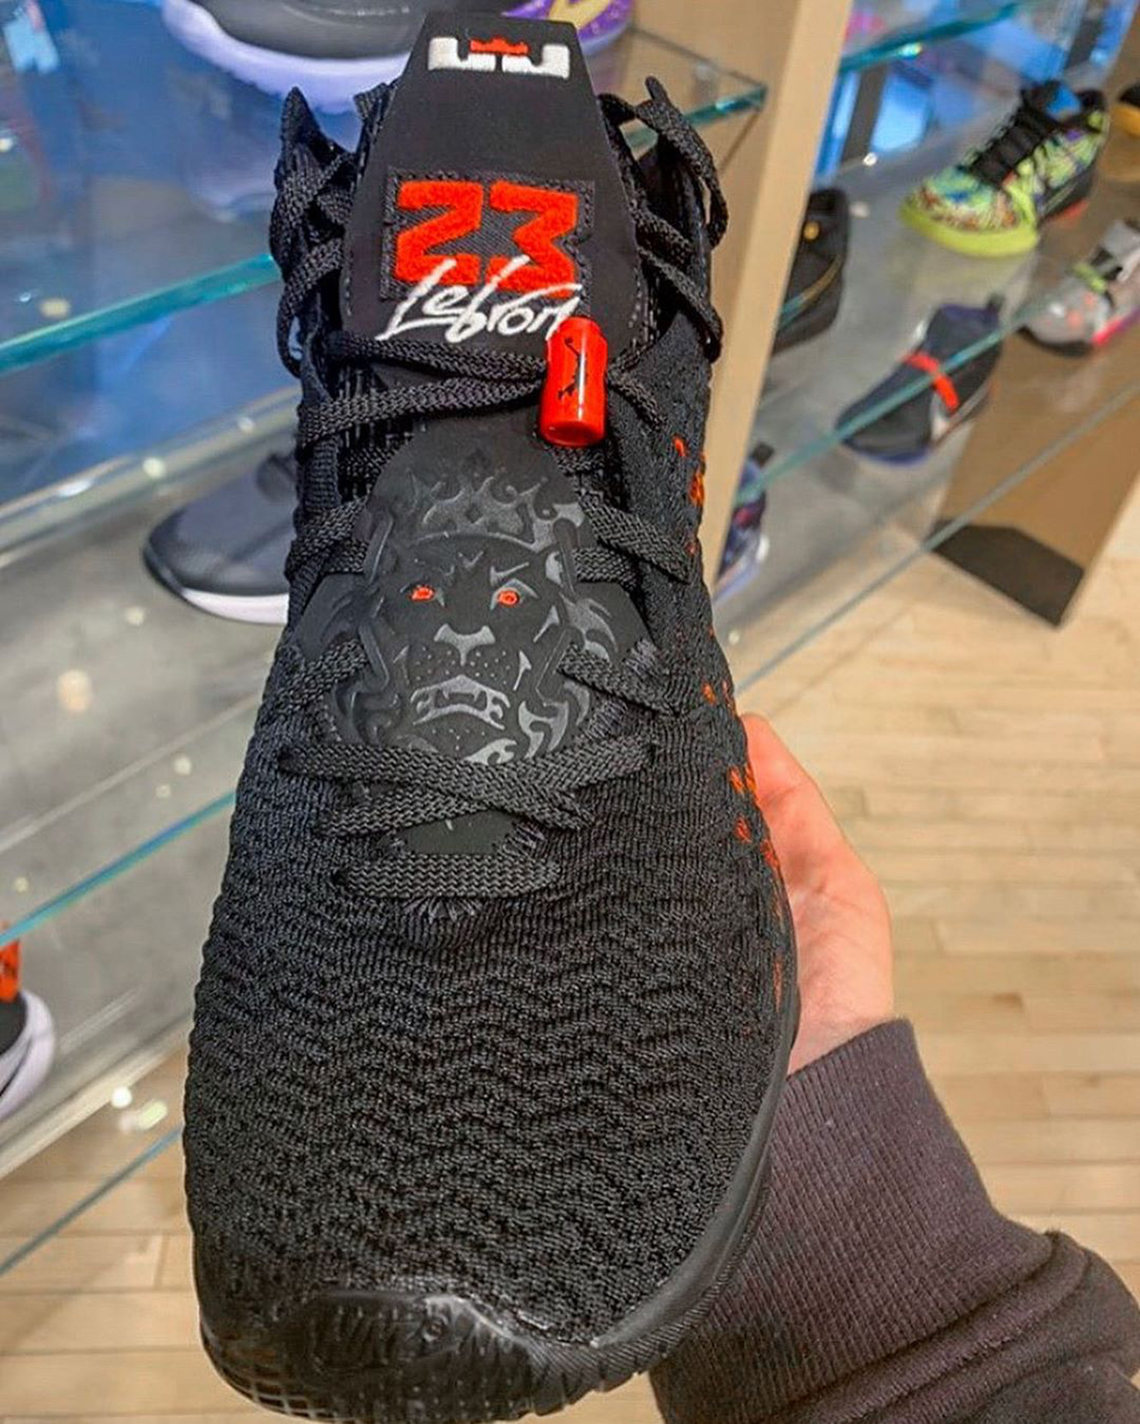 lebron 17 infrared release